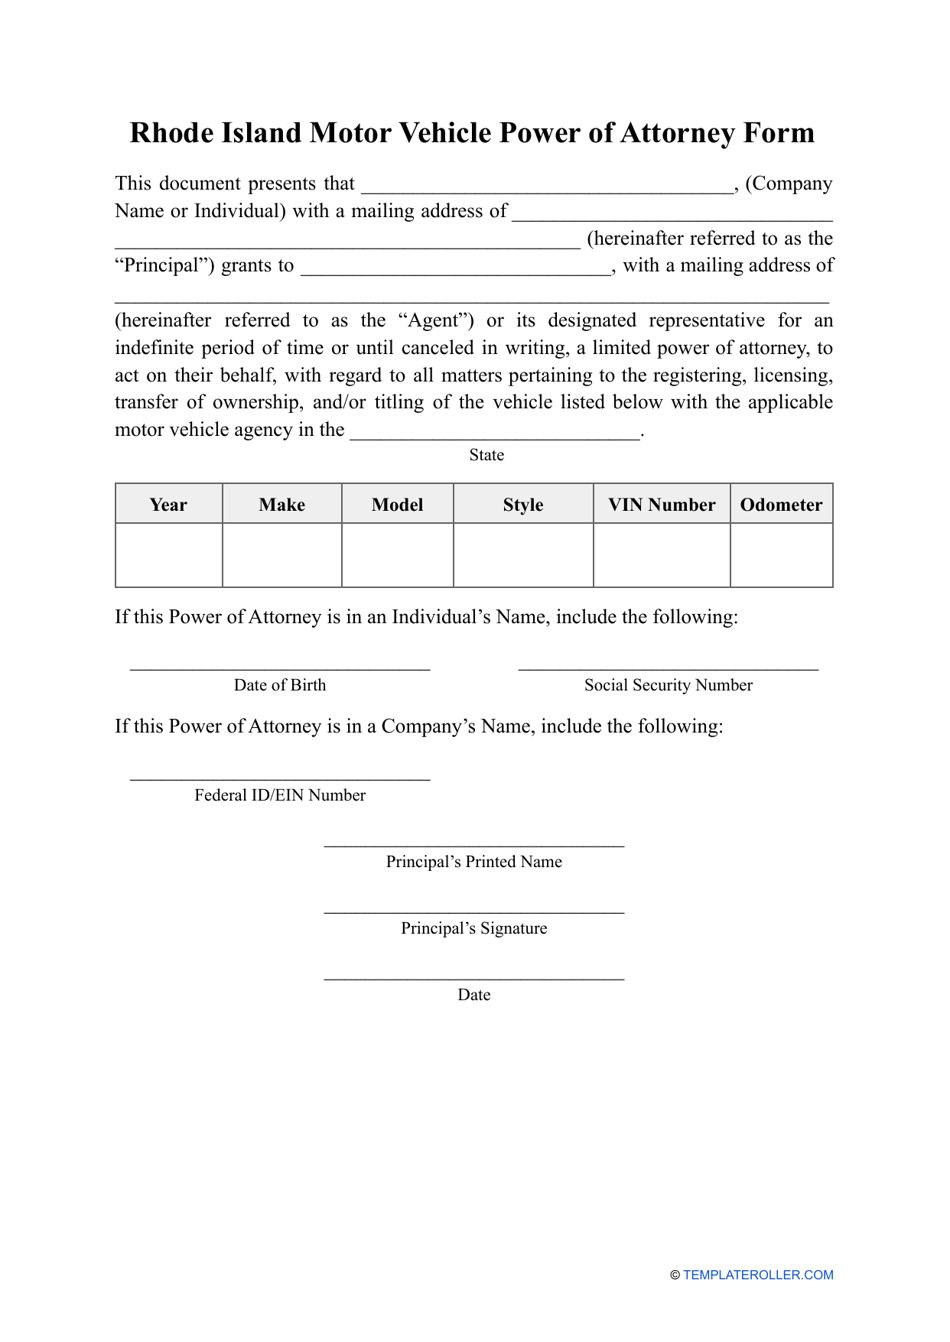 Motor Vehicle Power of Attorney Form - Rhode Island, Page 1